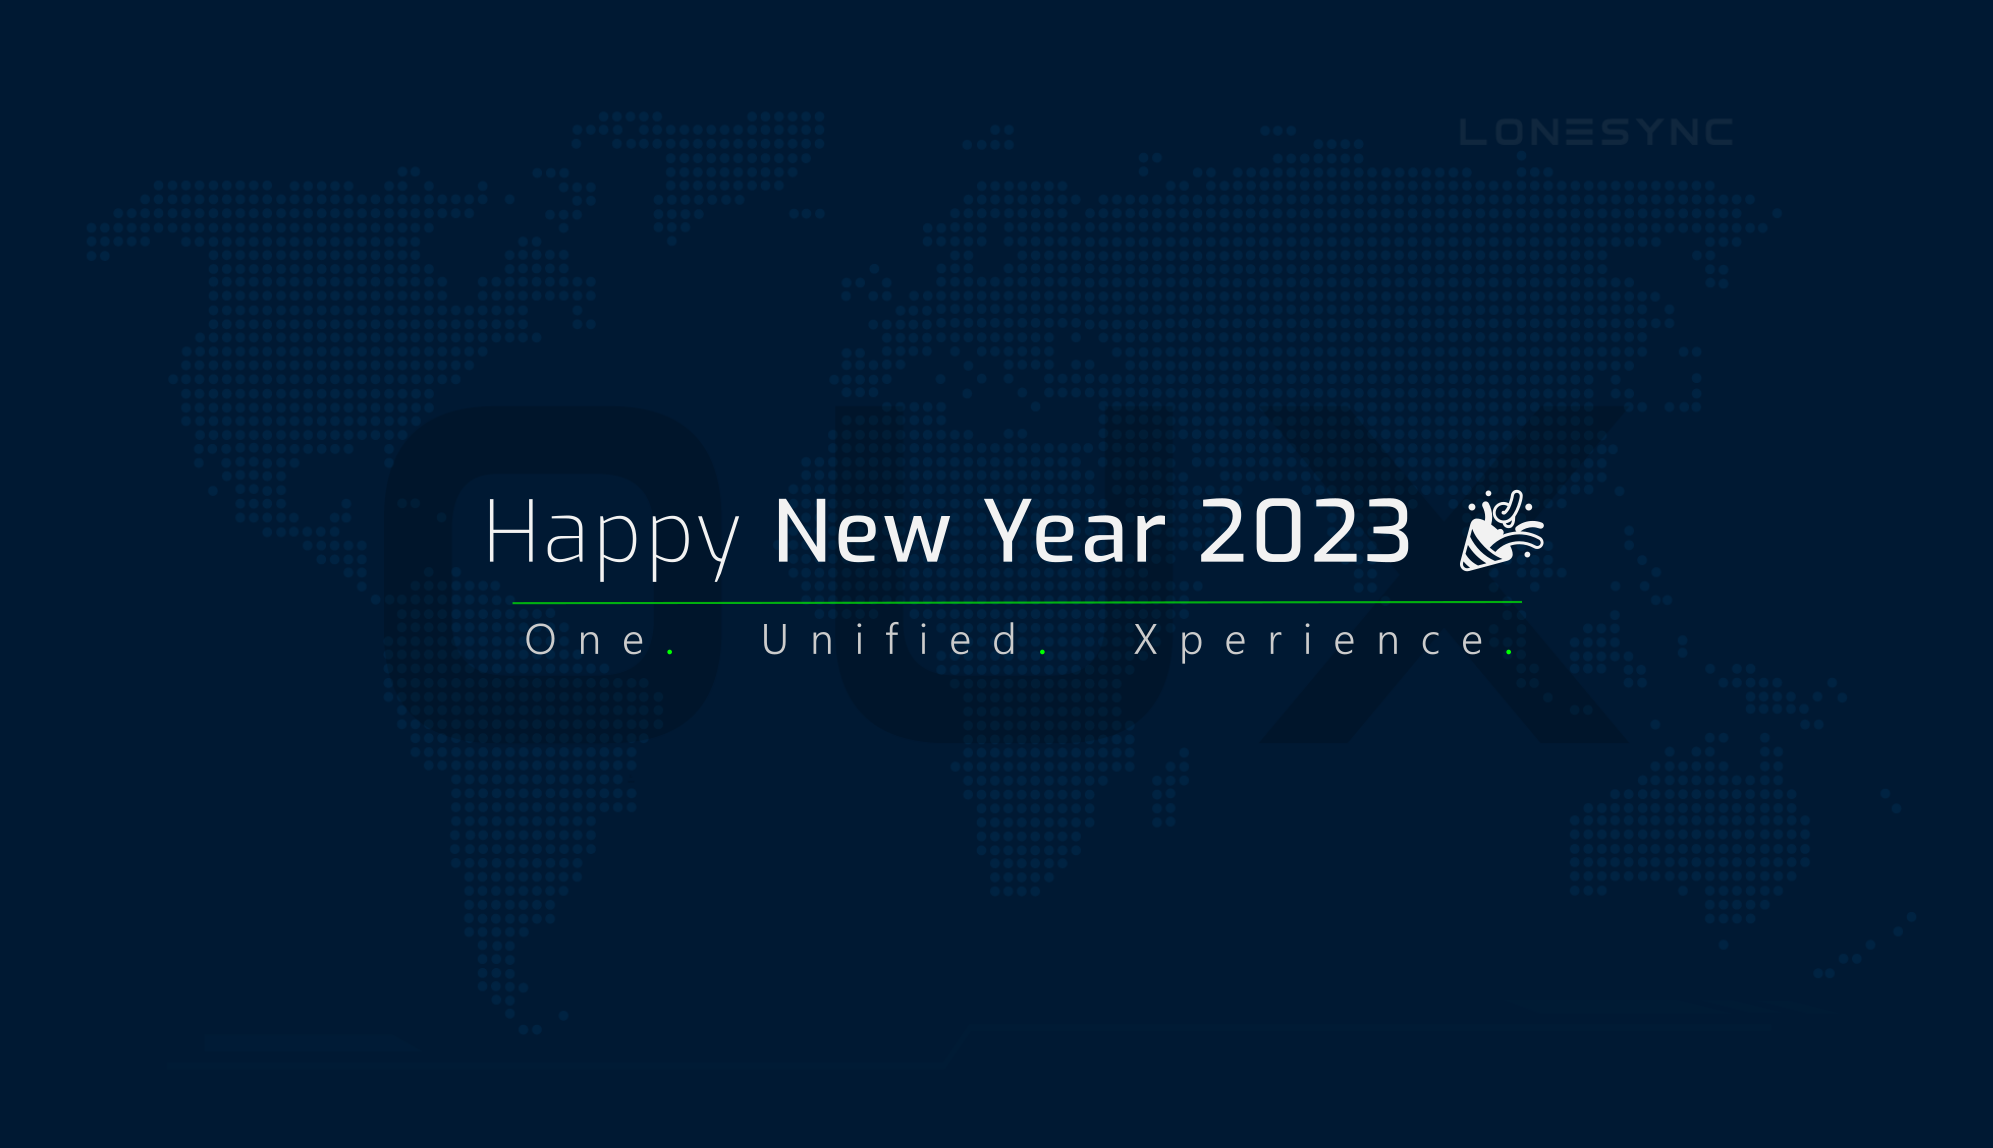 UI Happy New Year 2023 for ONE Unified Xperience by LoneSync